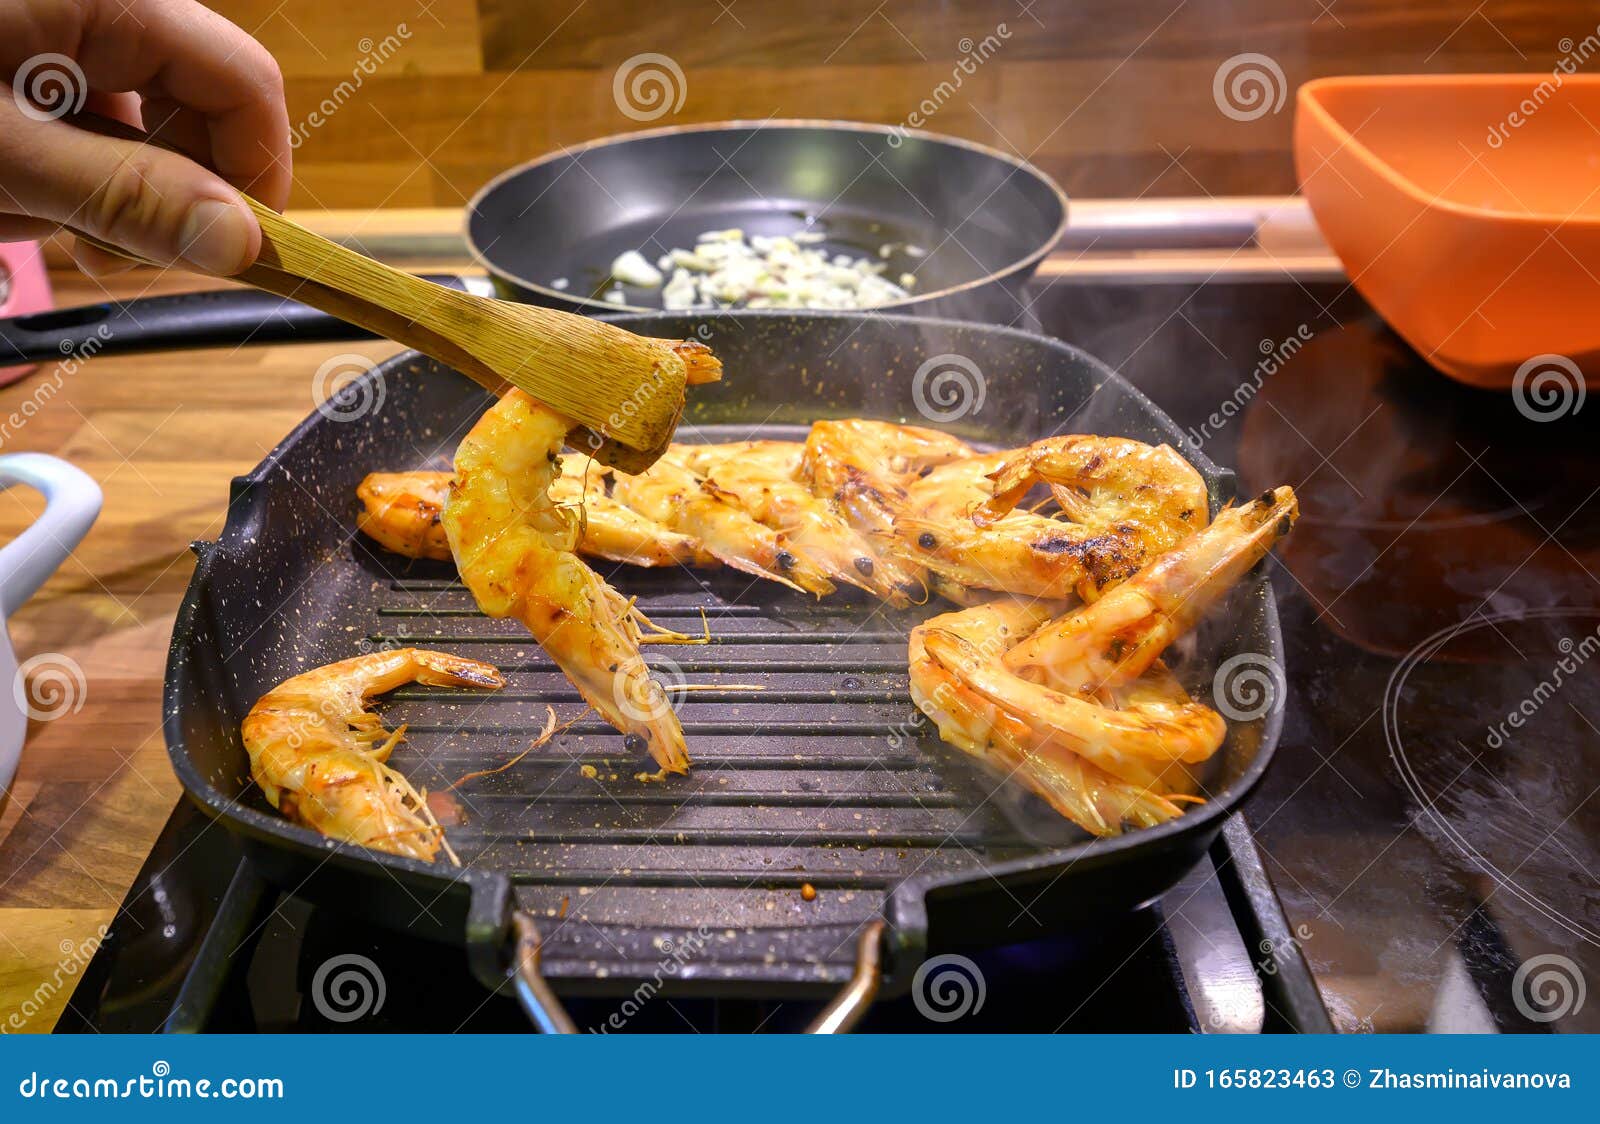 Big Shrimps Prawns On Grill Pan Stock Image Image Of Healthy Hand 165823463,Oxtail Stew Slow Cooker